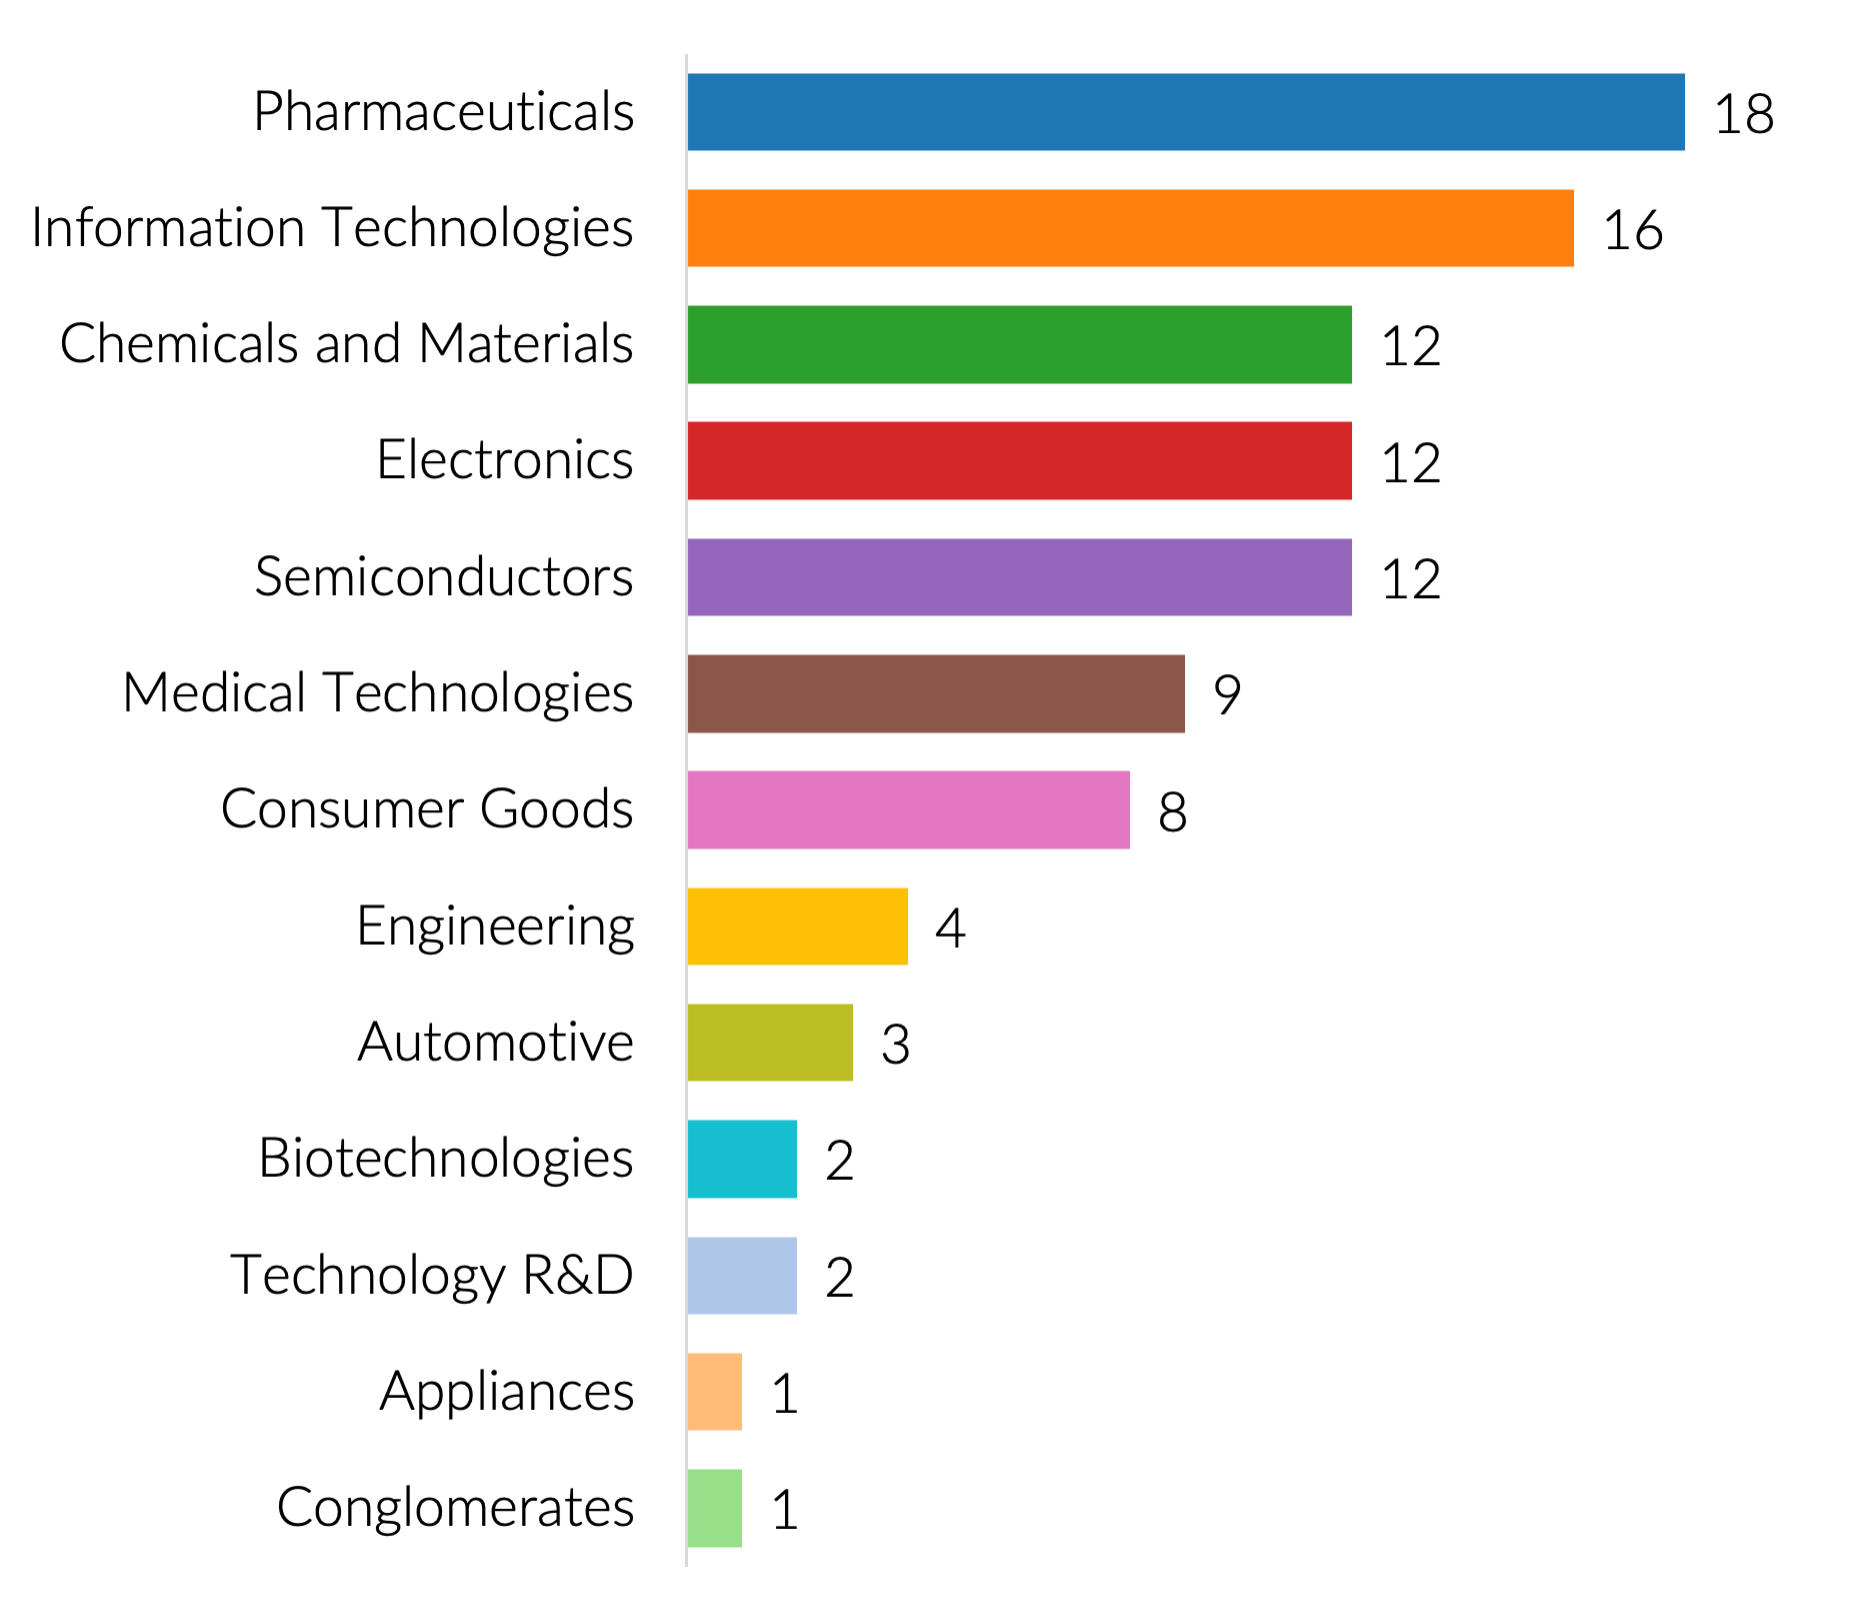 Report Finds Pharma Industry Continues to be in the Lead of Top 100 Innovator Businesses